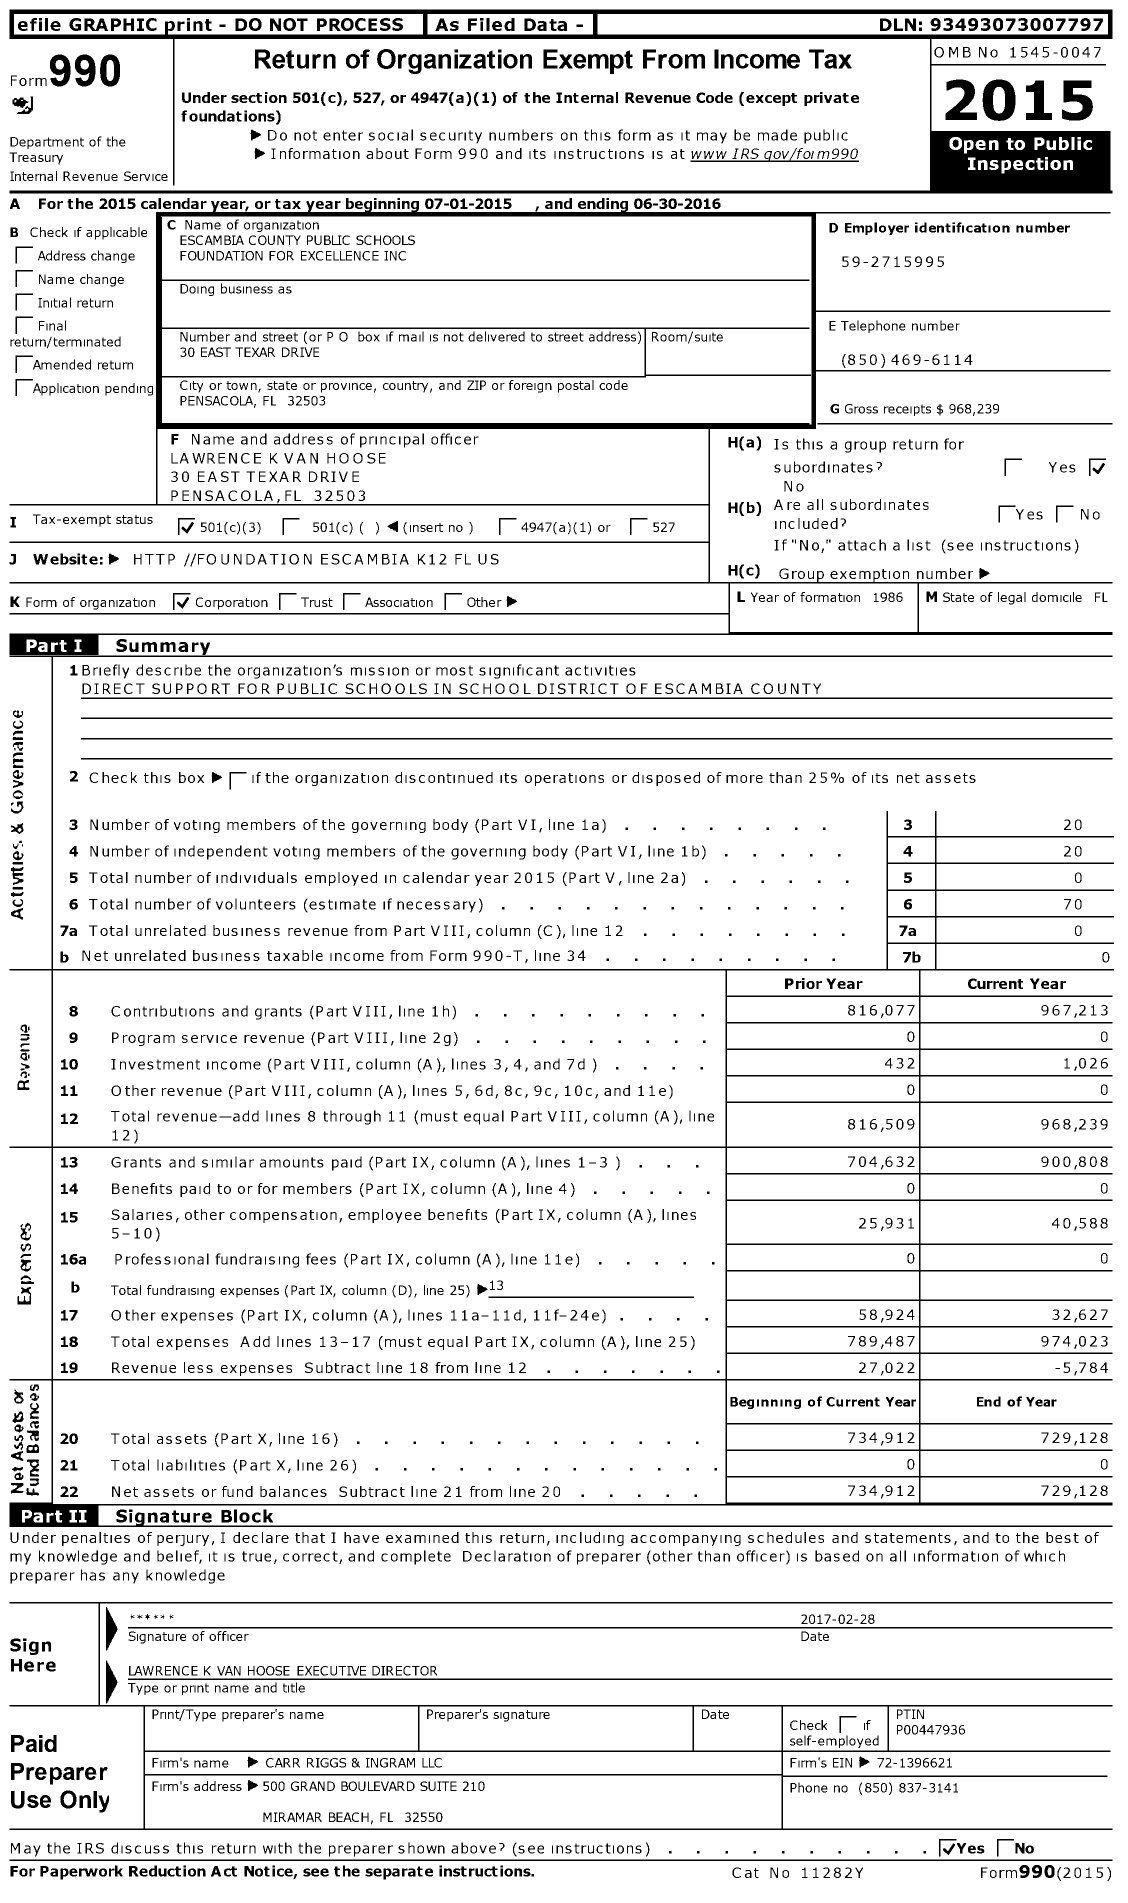 Image of first page of 2015 Form 990 for Escambia County Public Schools Foundation for Excellence